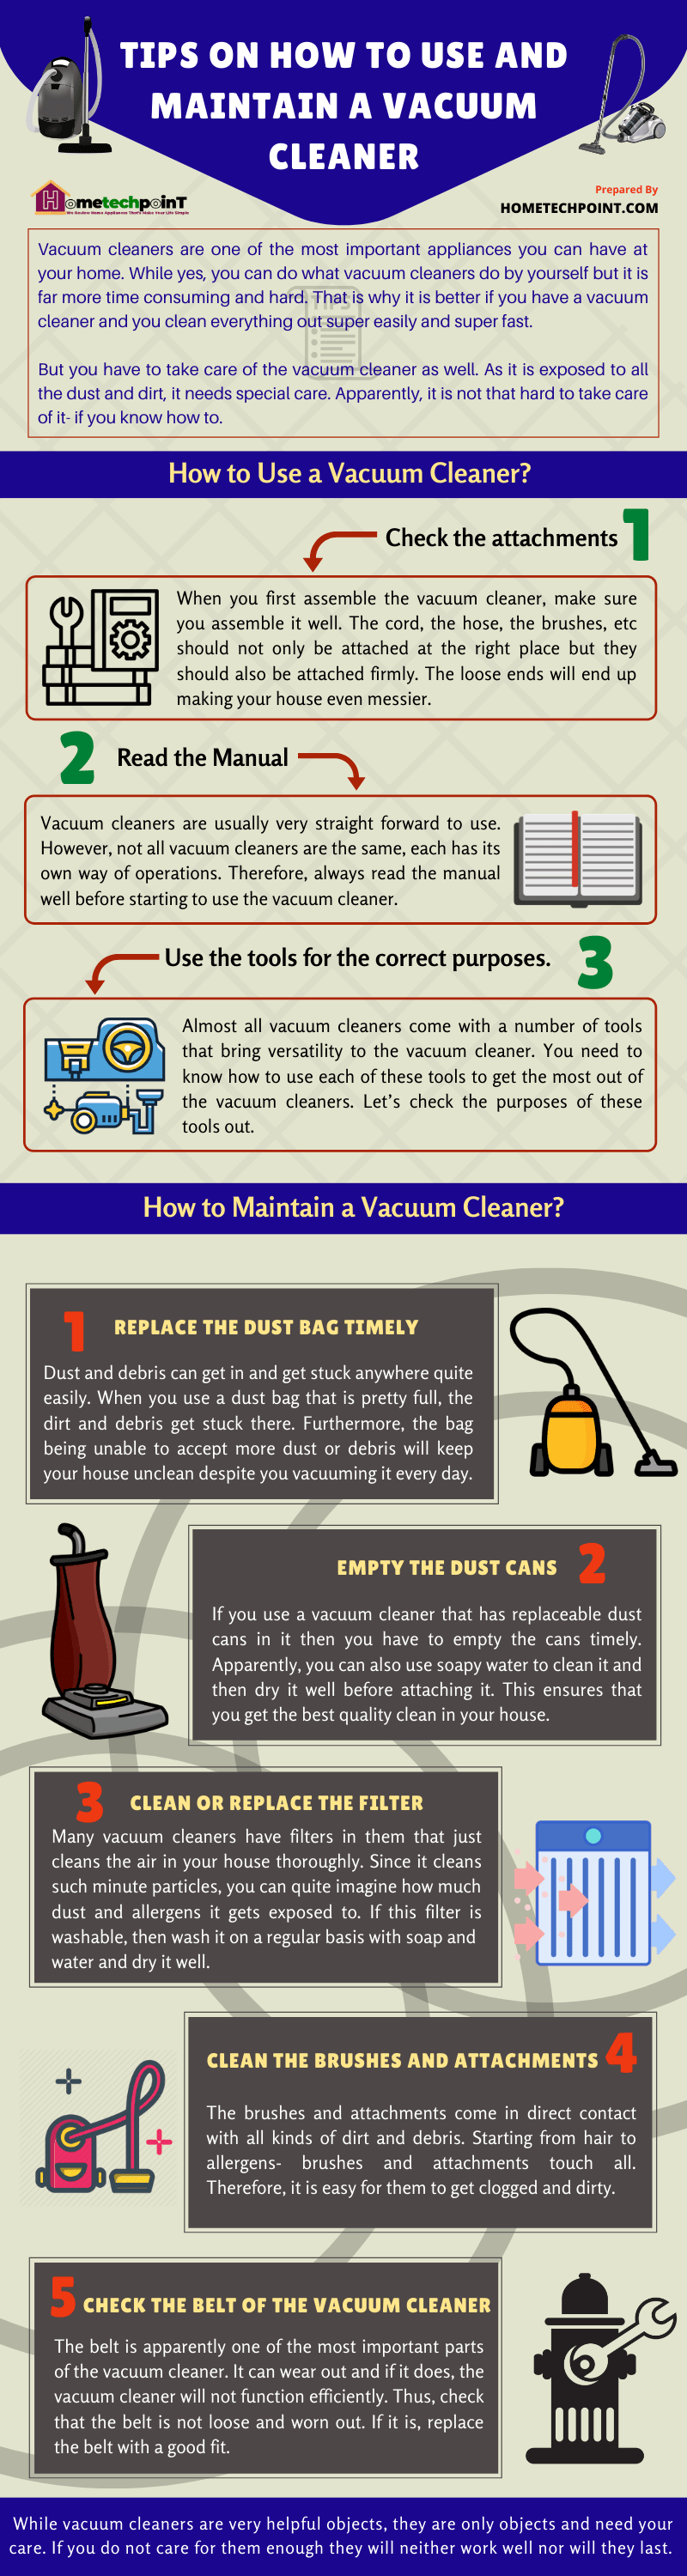 Tips on How to Use and Maintain Vacuum Cleaner